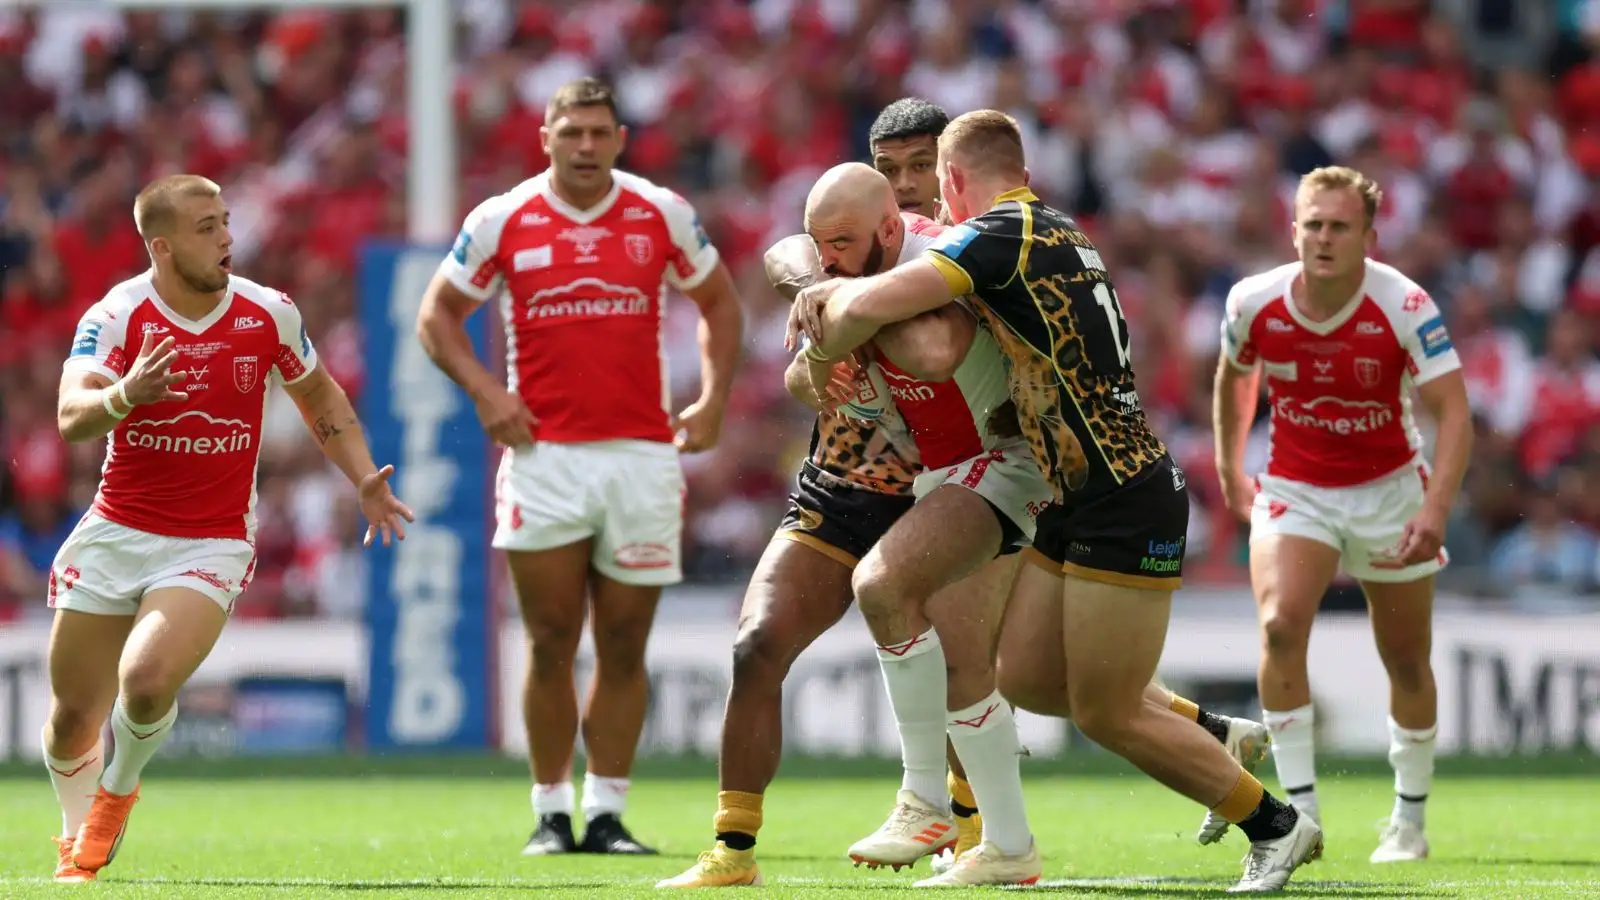 ‘A fuss over nothing’ – Punditry duo defend John Asiata controversial tackle technique in Challenge Cup final 